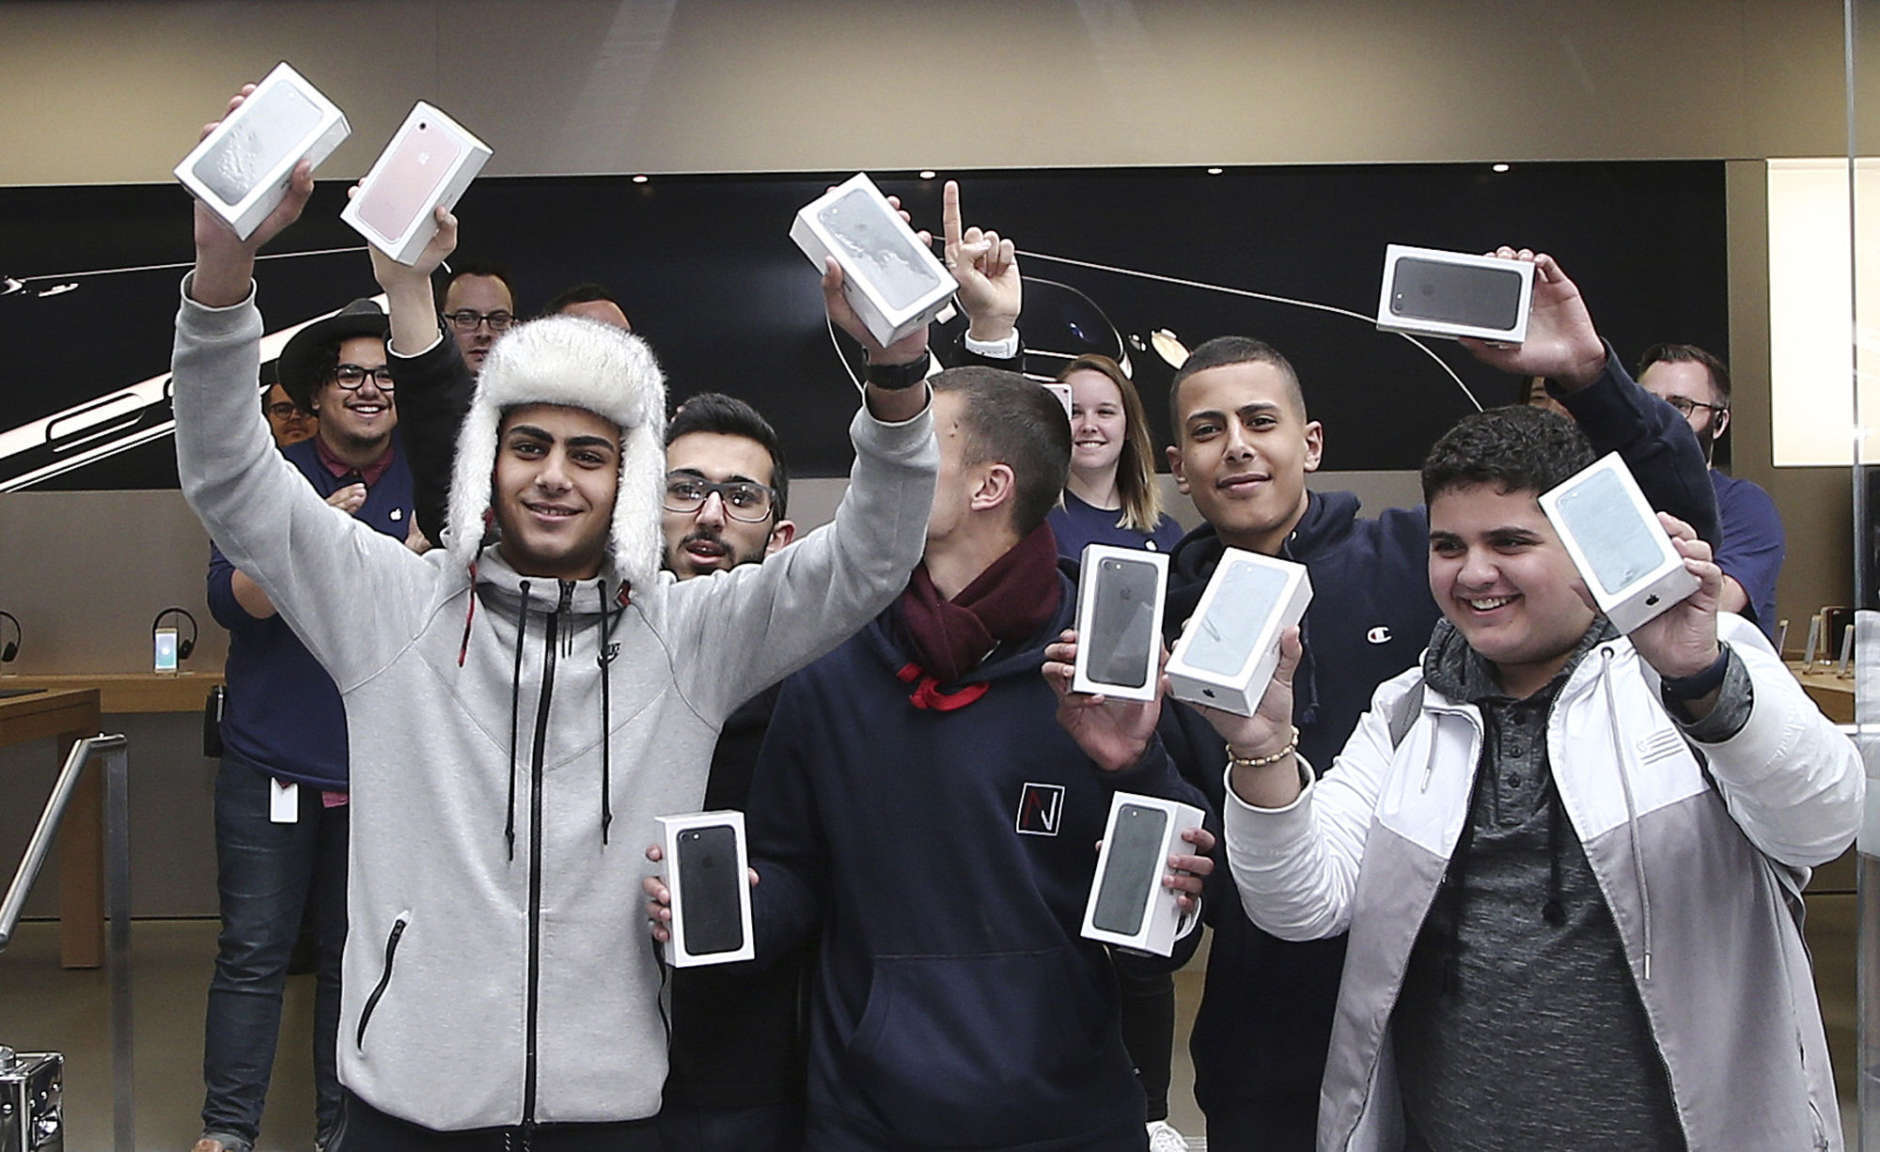 The first group of customers including Bishoy Behman, left, and Marcus Barsoum, right, hold up their purchases at the Apple store in Sydney, Australia, Friday, Sept. 16, 2016. Behman, a 17-year-old high school student who has camped on the street in front of the store since Wednesday morning was the first retail customer in the world to purchase the new model phone. (AP Photo/Rob Griffith)